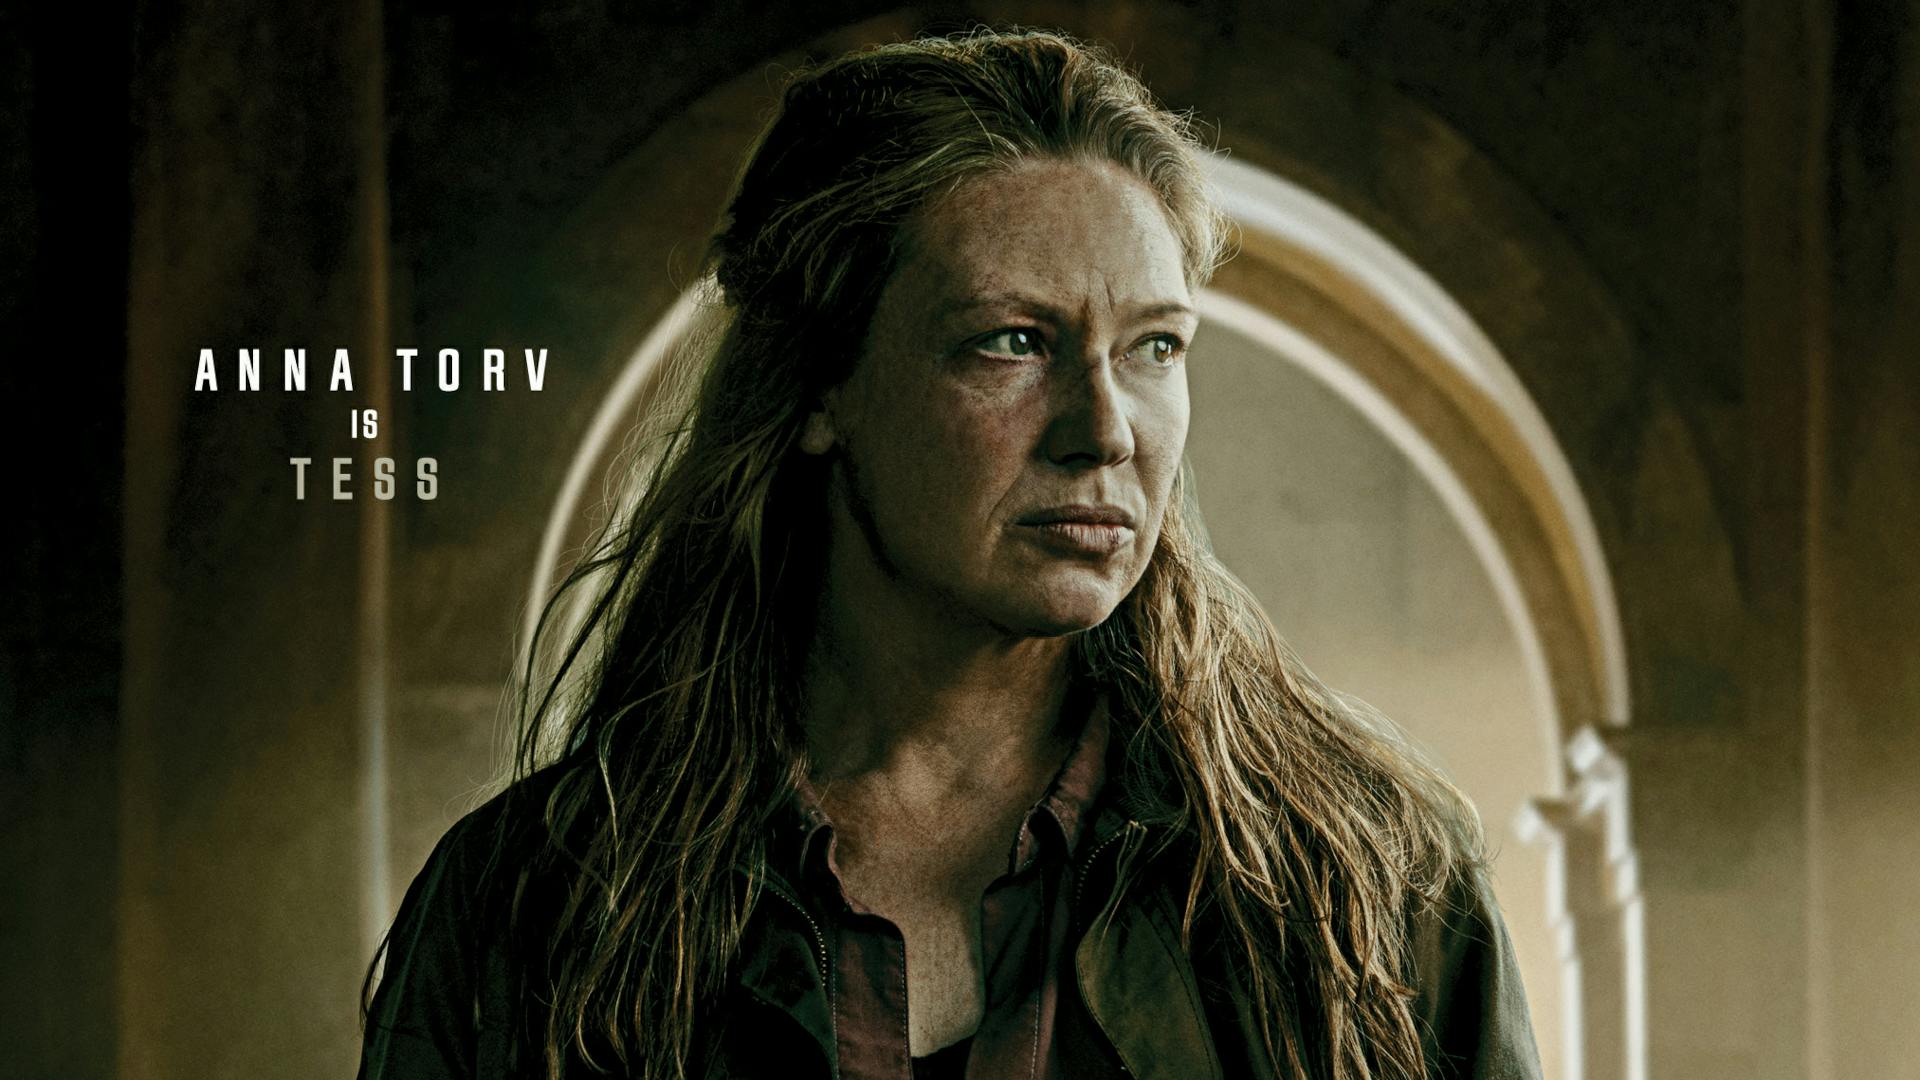 MBTI personality for videogame characters from HBO show the last of us tess by anna torv